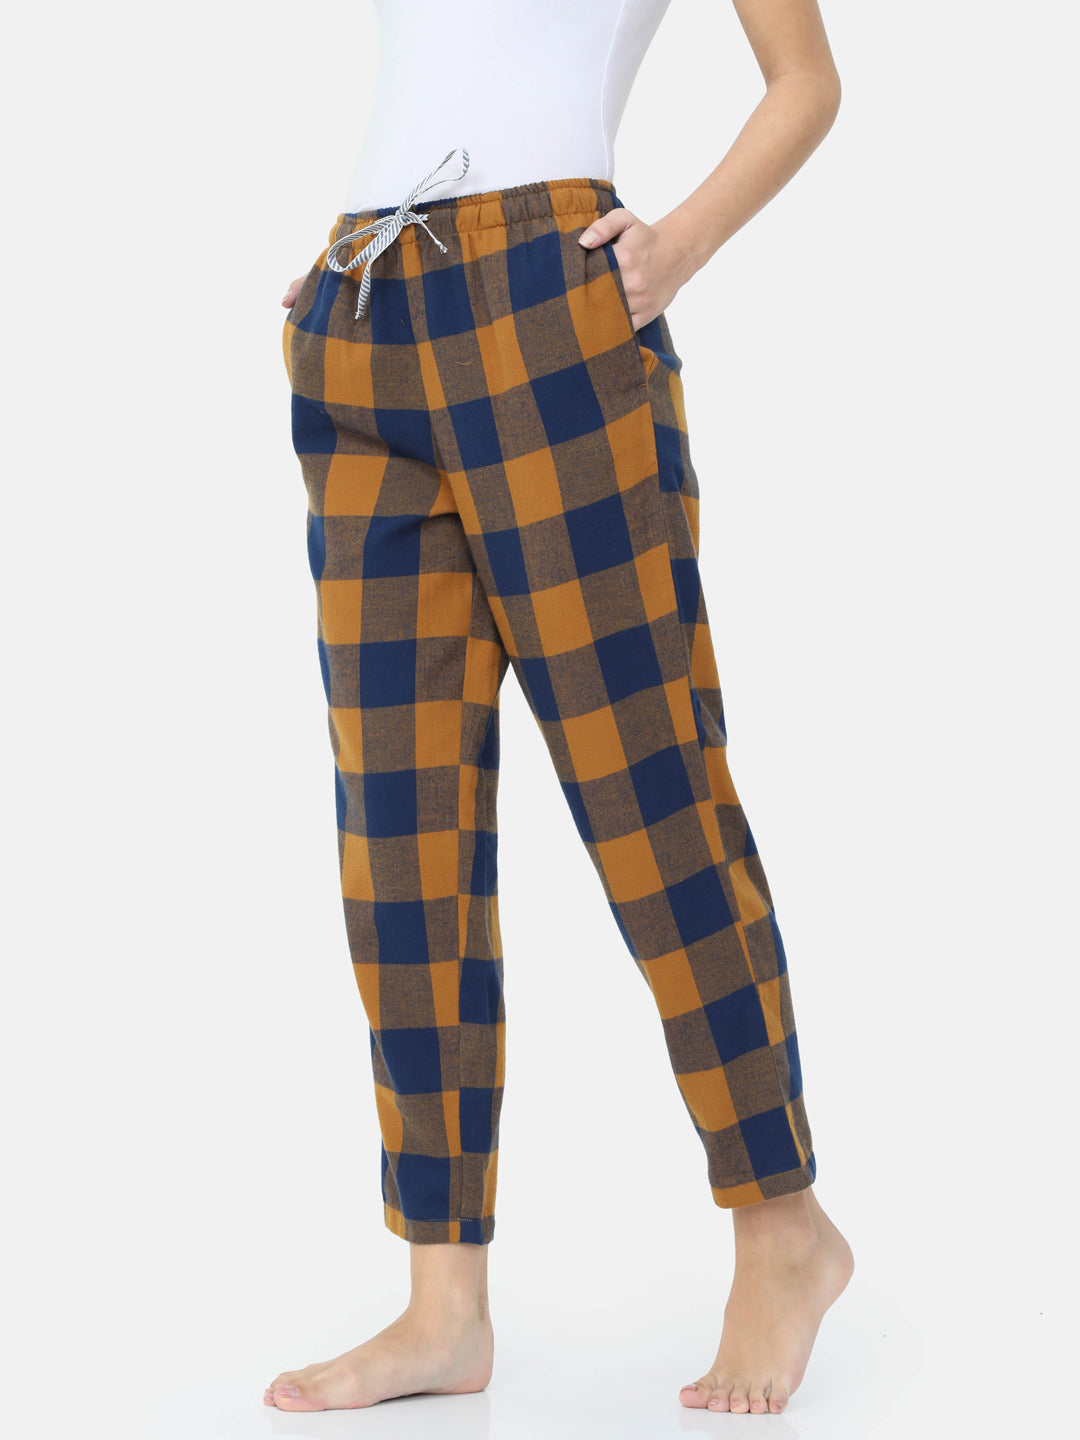 The Fired Up Women PJ Pants